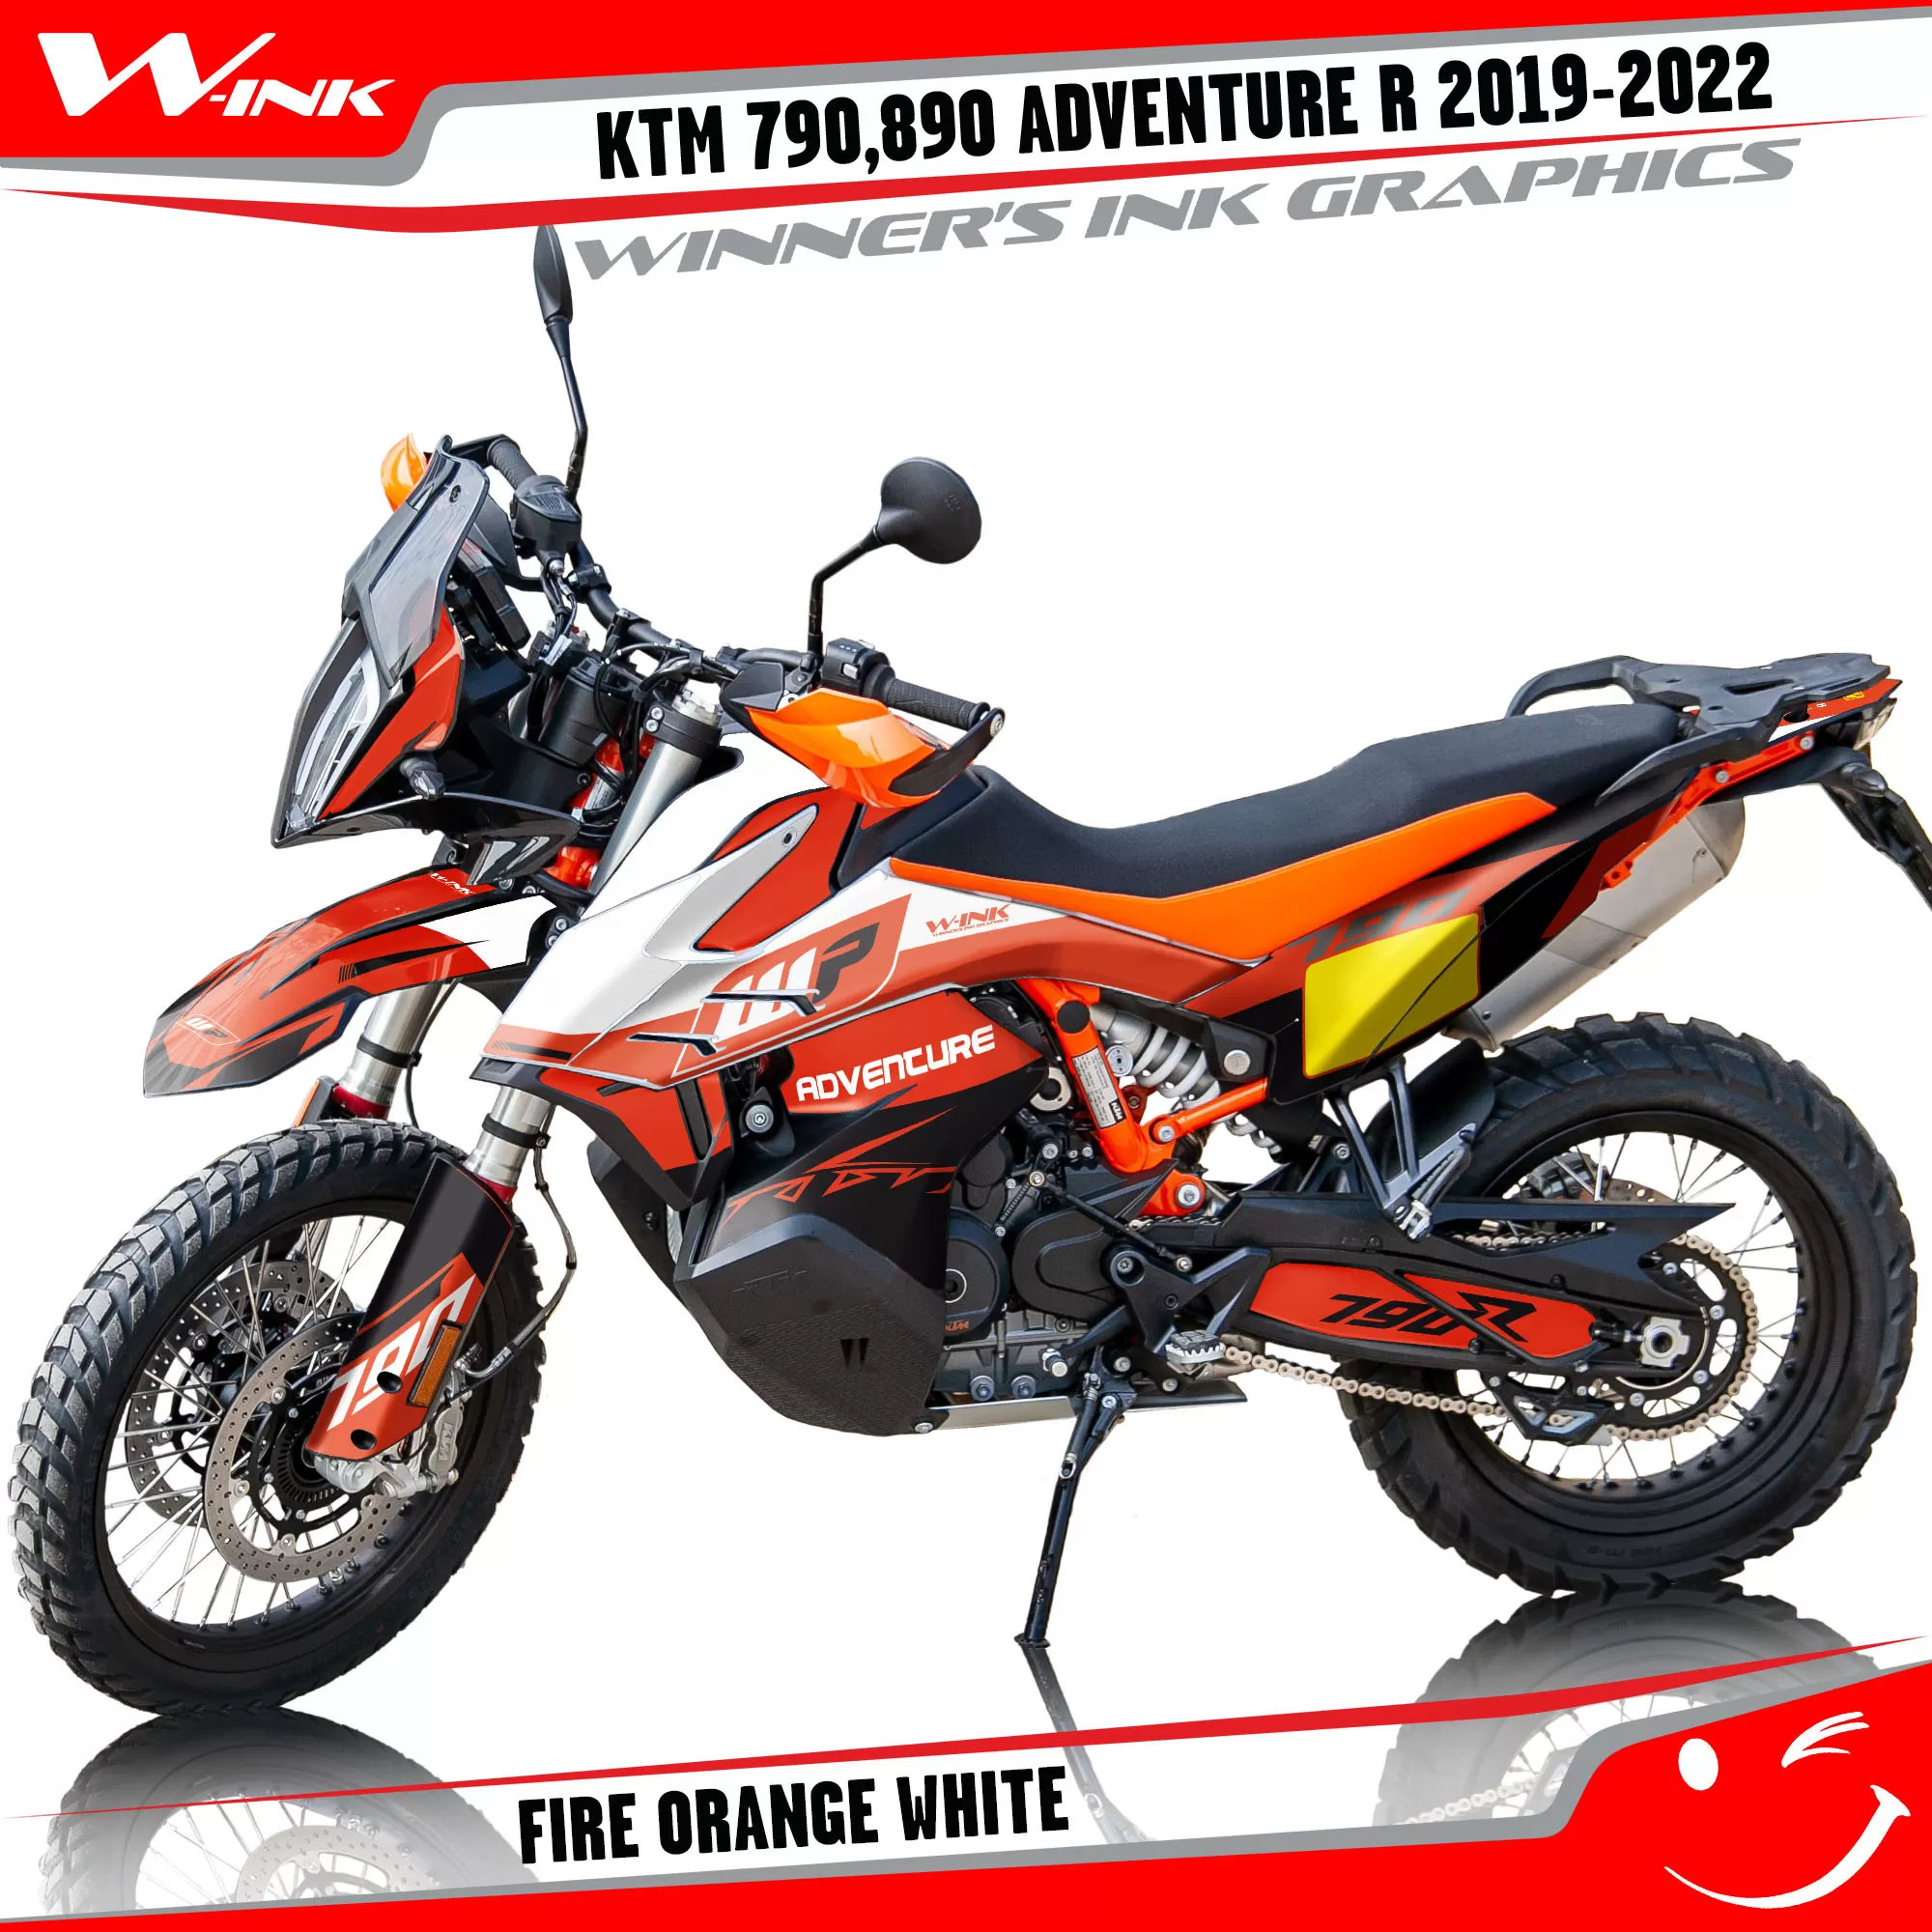 Adventure-R-790-890-2019-2020-2021-2022-graphics-kit-and-decals-with-designs-Fire-Orange-White